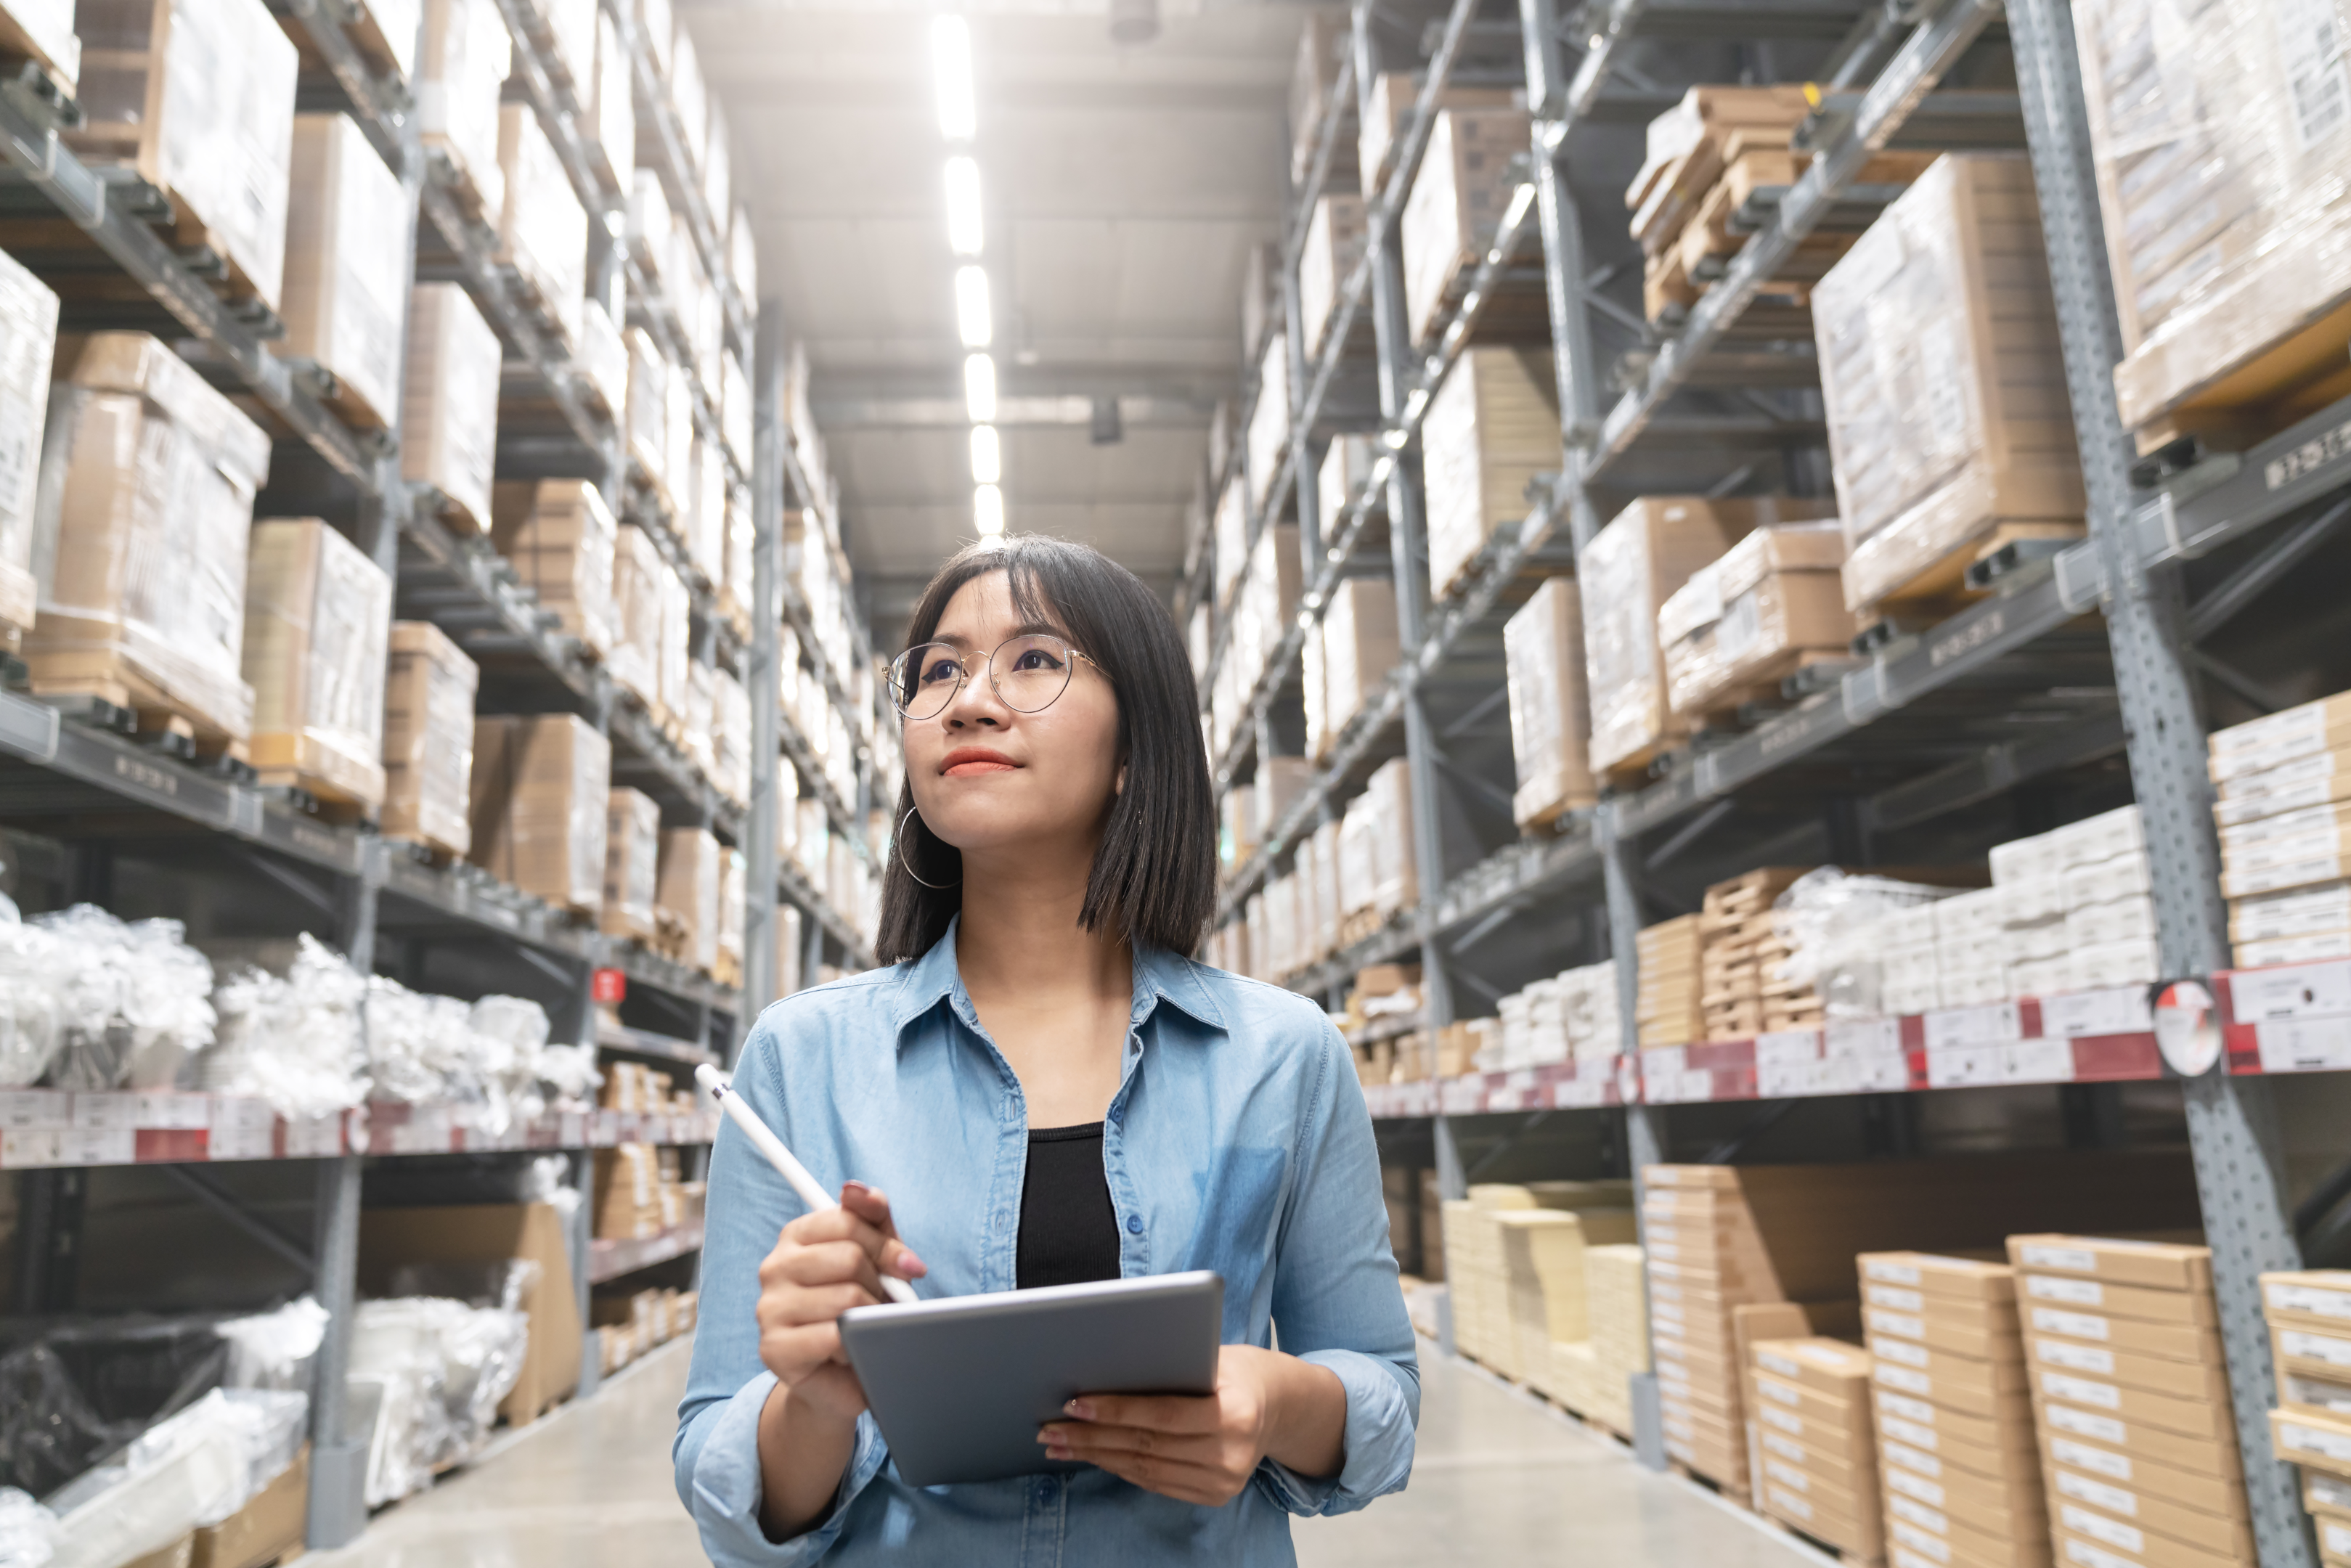 Performing average inventory calculation can help determine your DSI